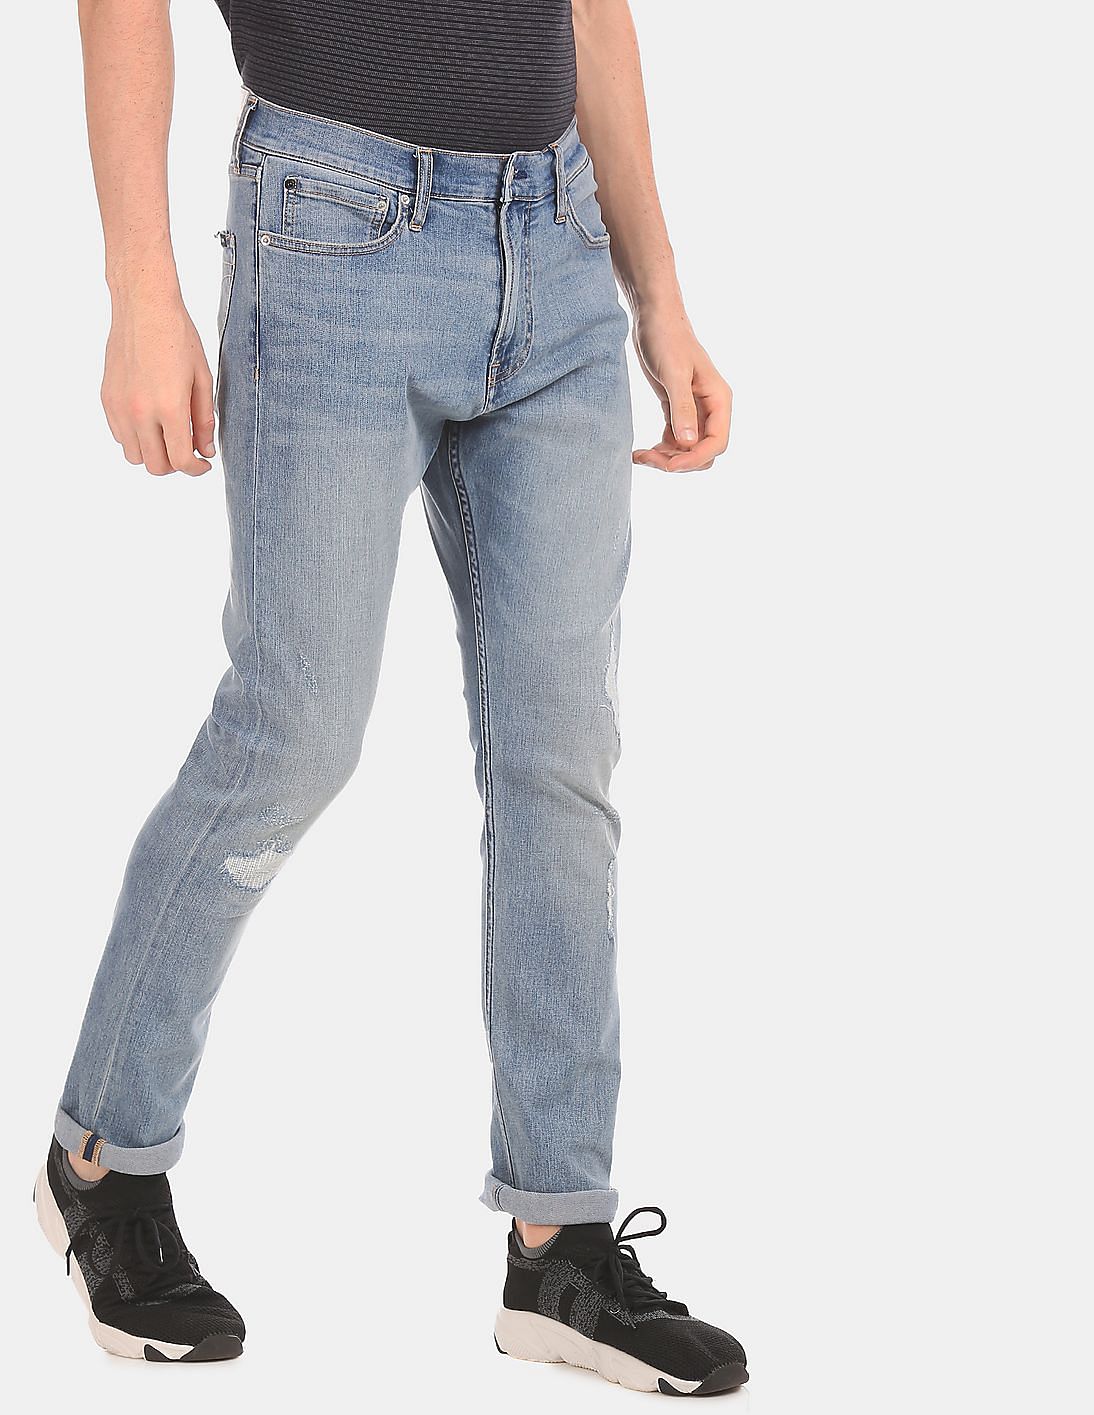 Buy Calvin Klein Men Blue Tapered Fit Distressed Jeans - NNNOW.com